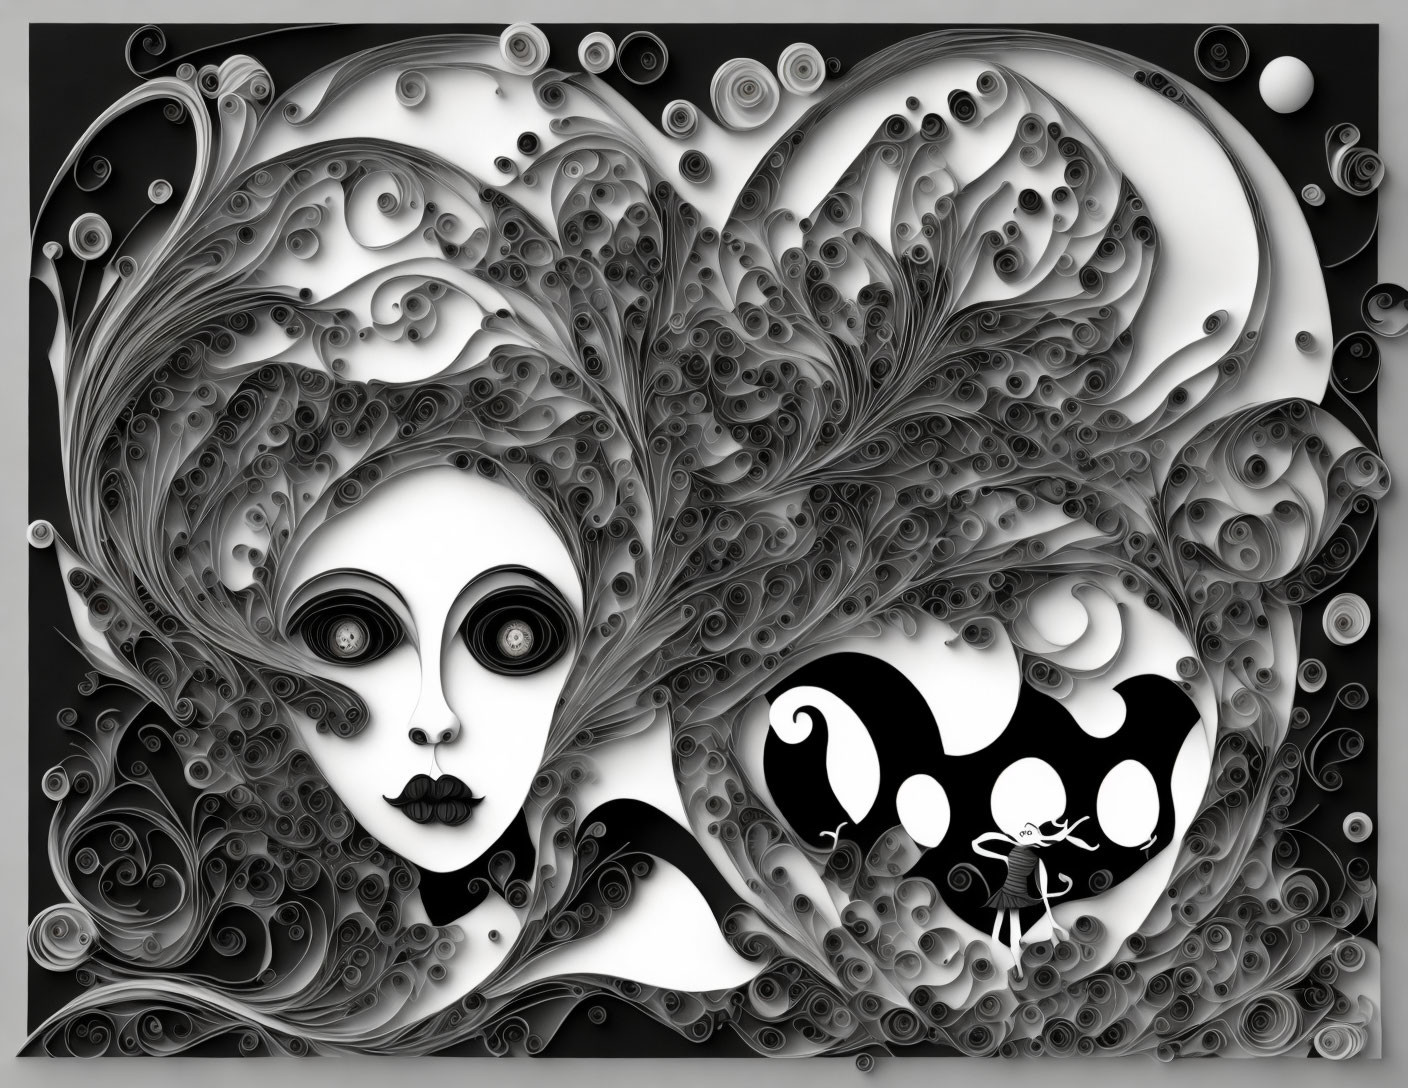 Monochromatic surreal artwork: stylized female face, swirling patterns, abstract shapes